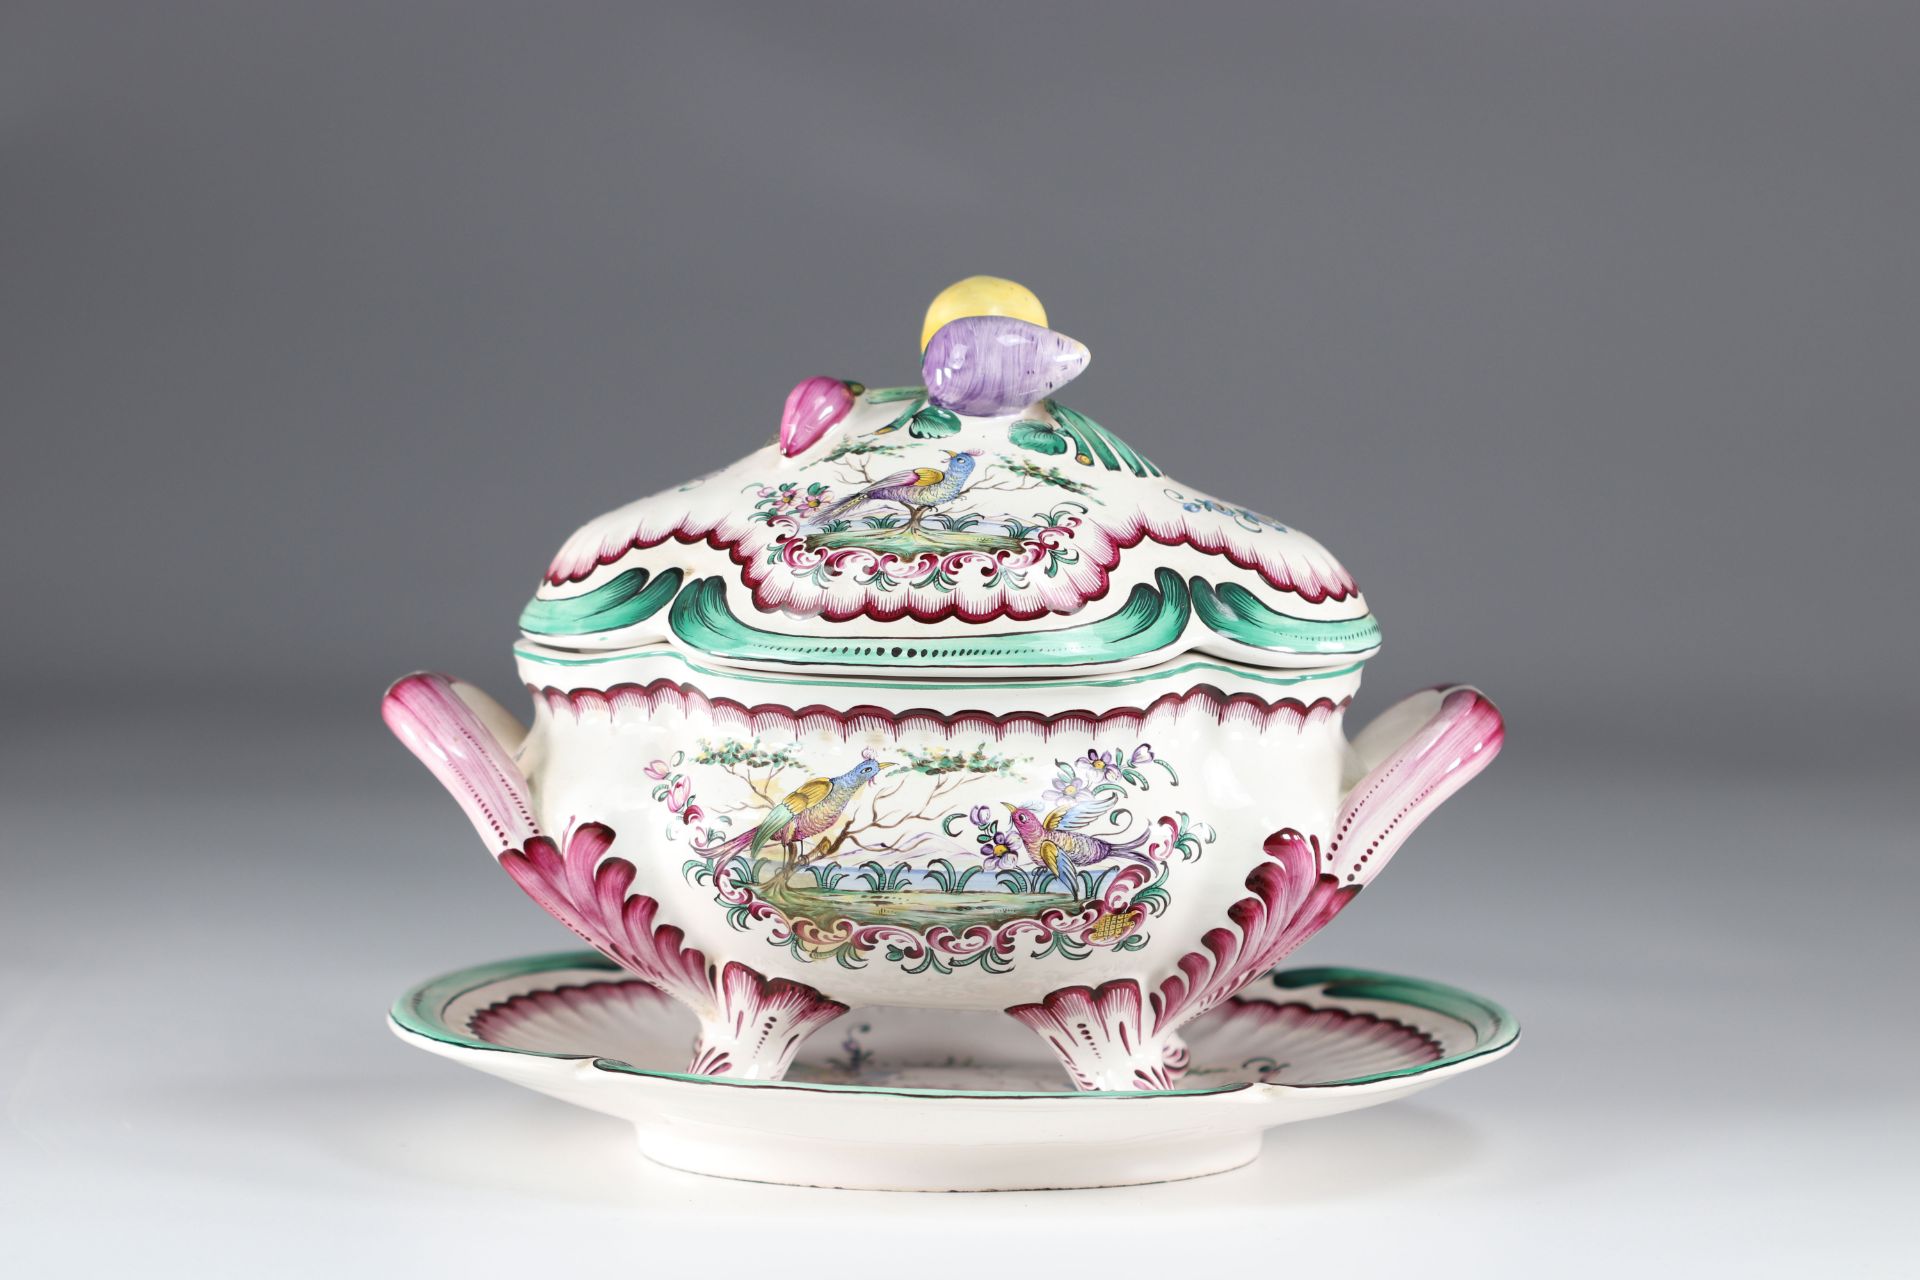 Aprey vegetable covered in earthenware with polychrome decoration, floral decoration and birds